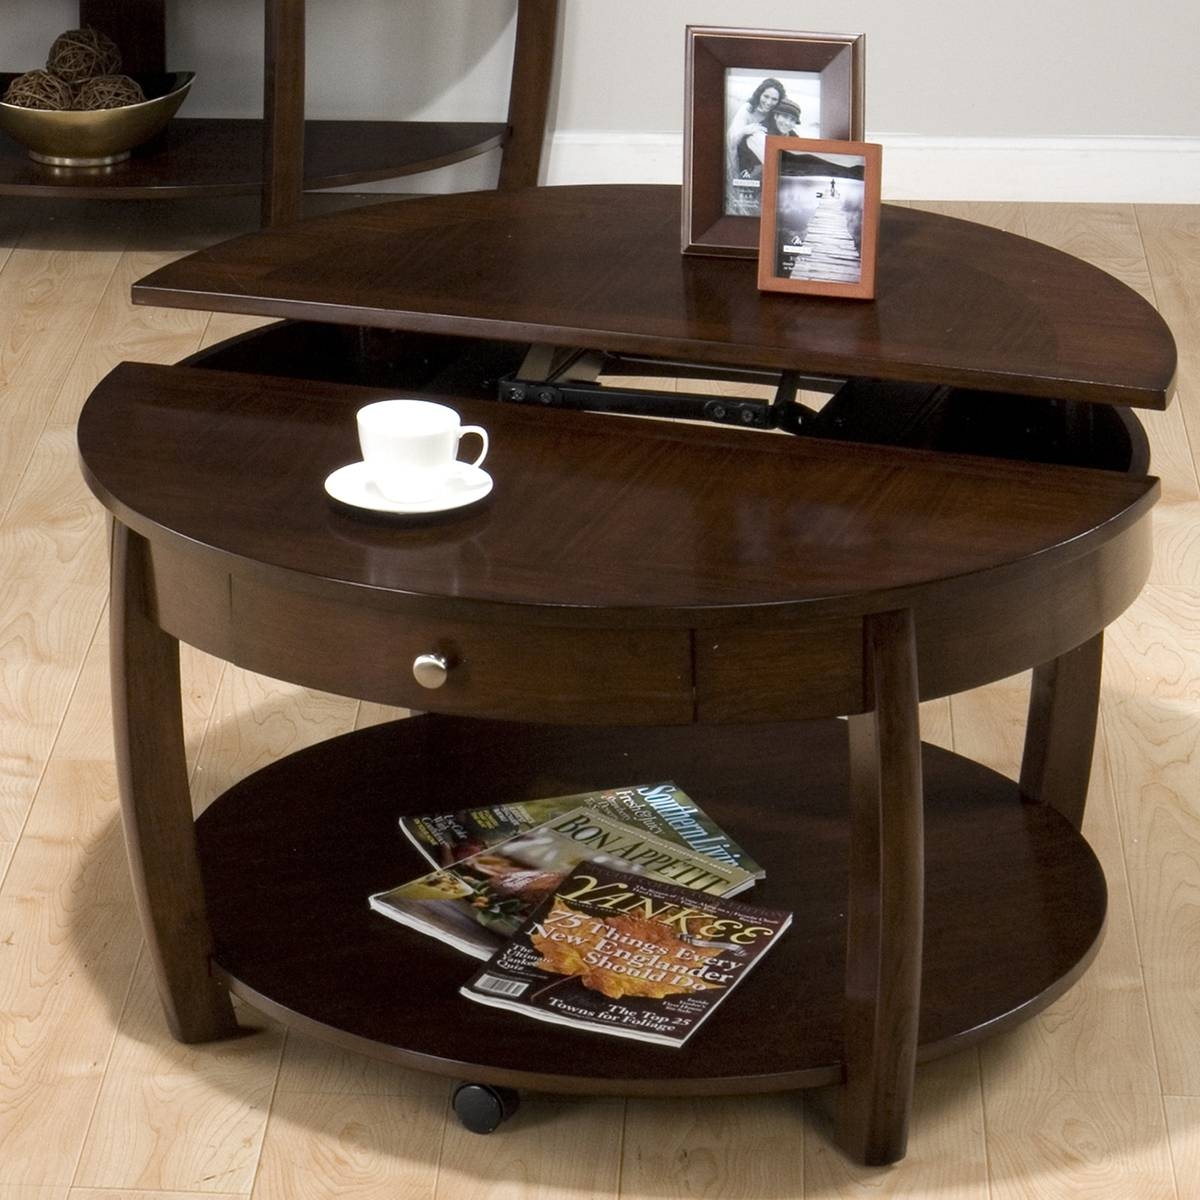 30 The Best Round Coffee Tables with Storage